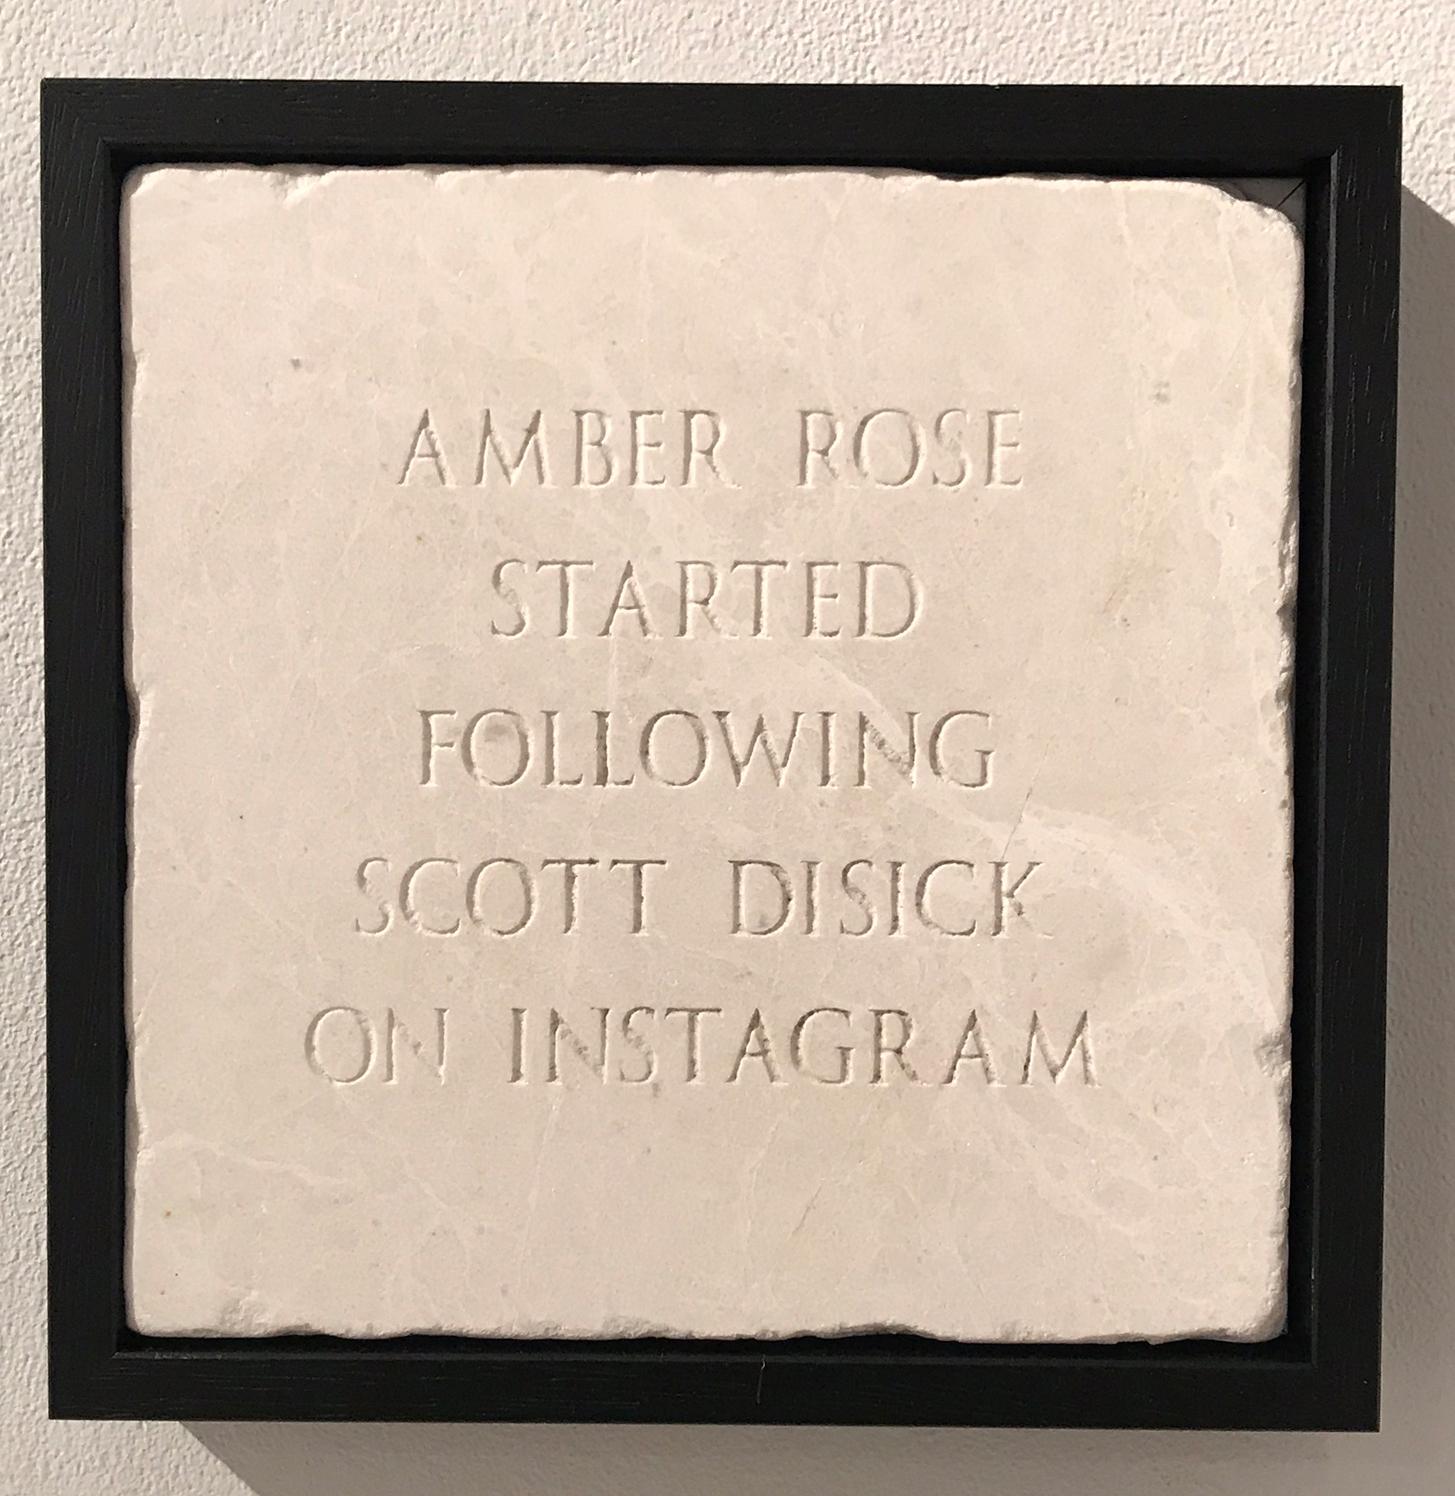 Amber Rose Started Following Scott Disick On Instagram, Marble, Sculpture, Signed - Mixed Media Art by Sarah Maple